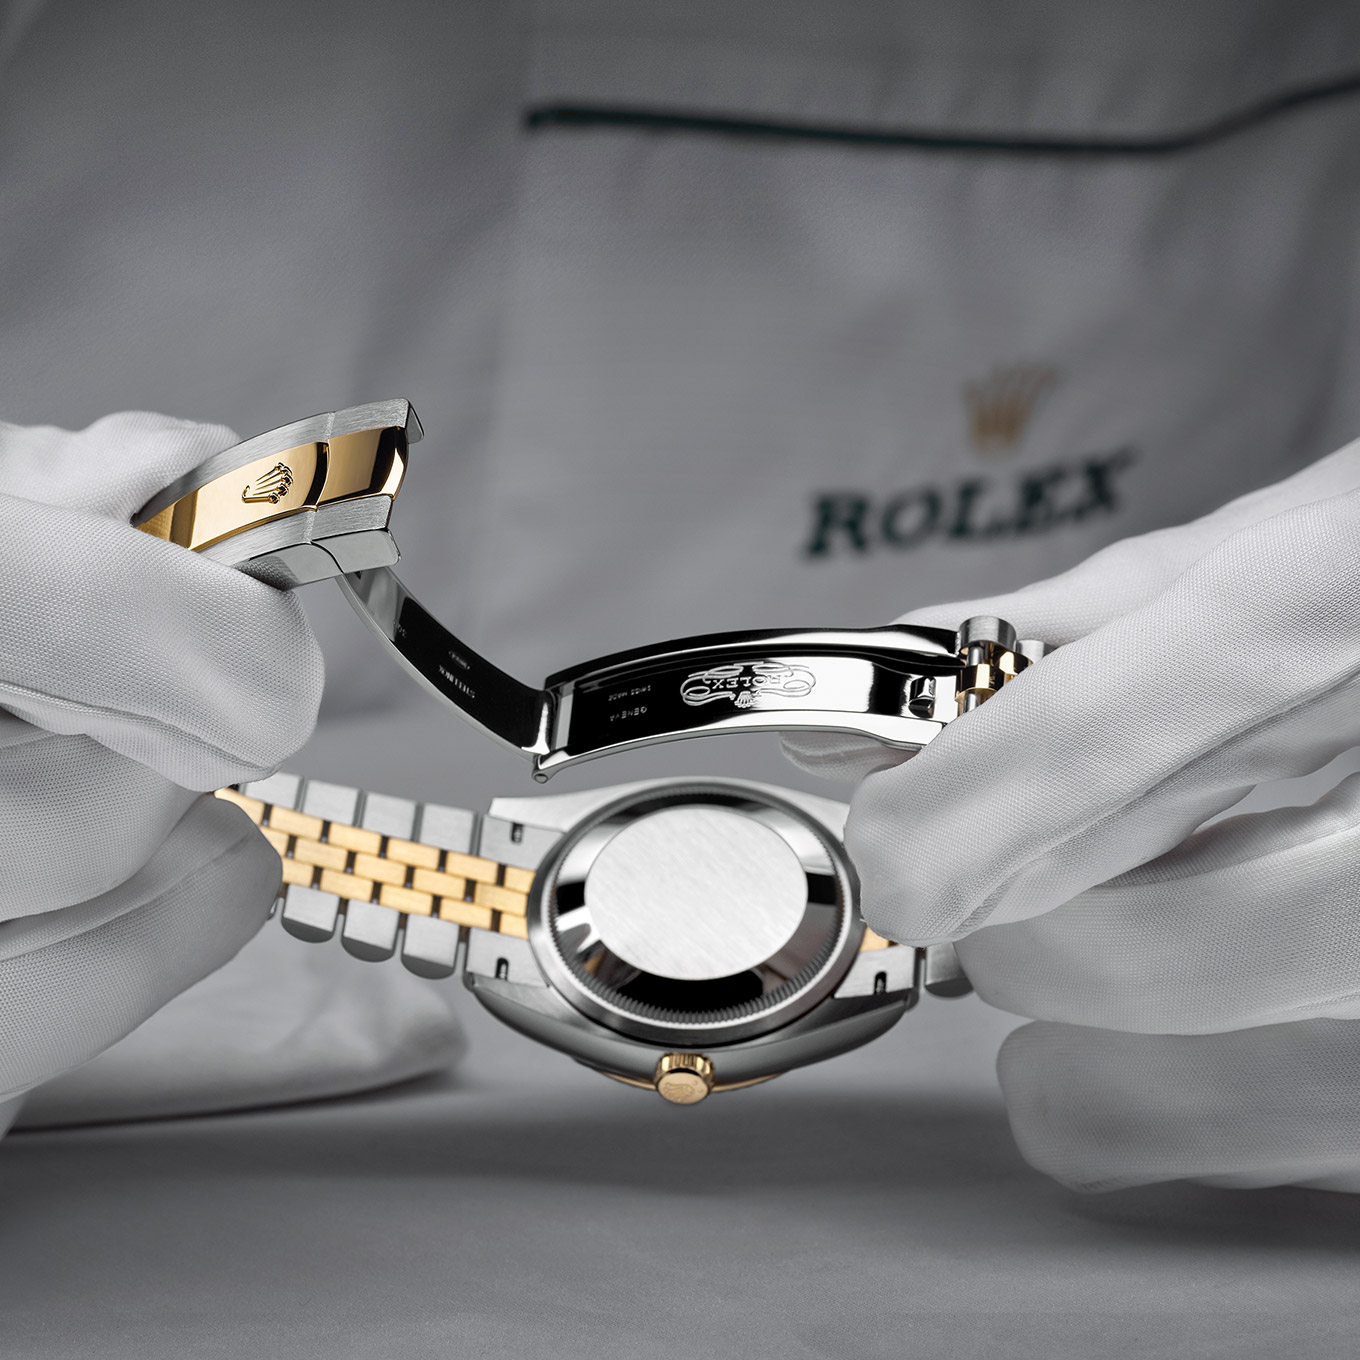 Servicing your Rolex at Baker Brothers in Bedford